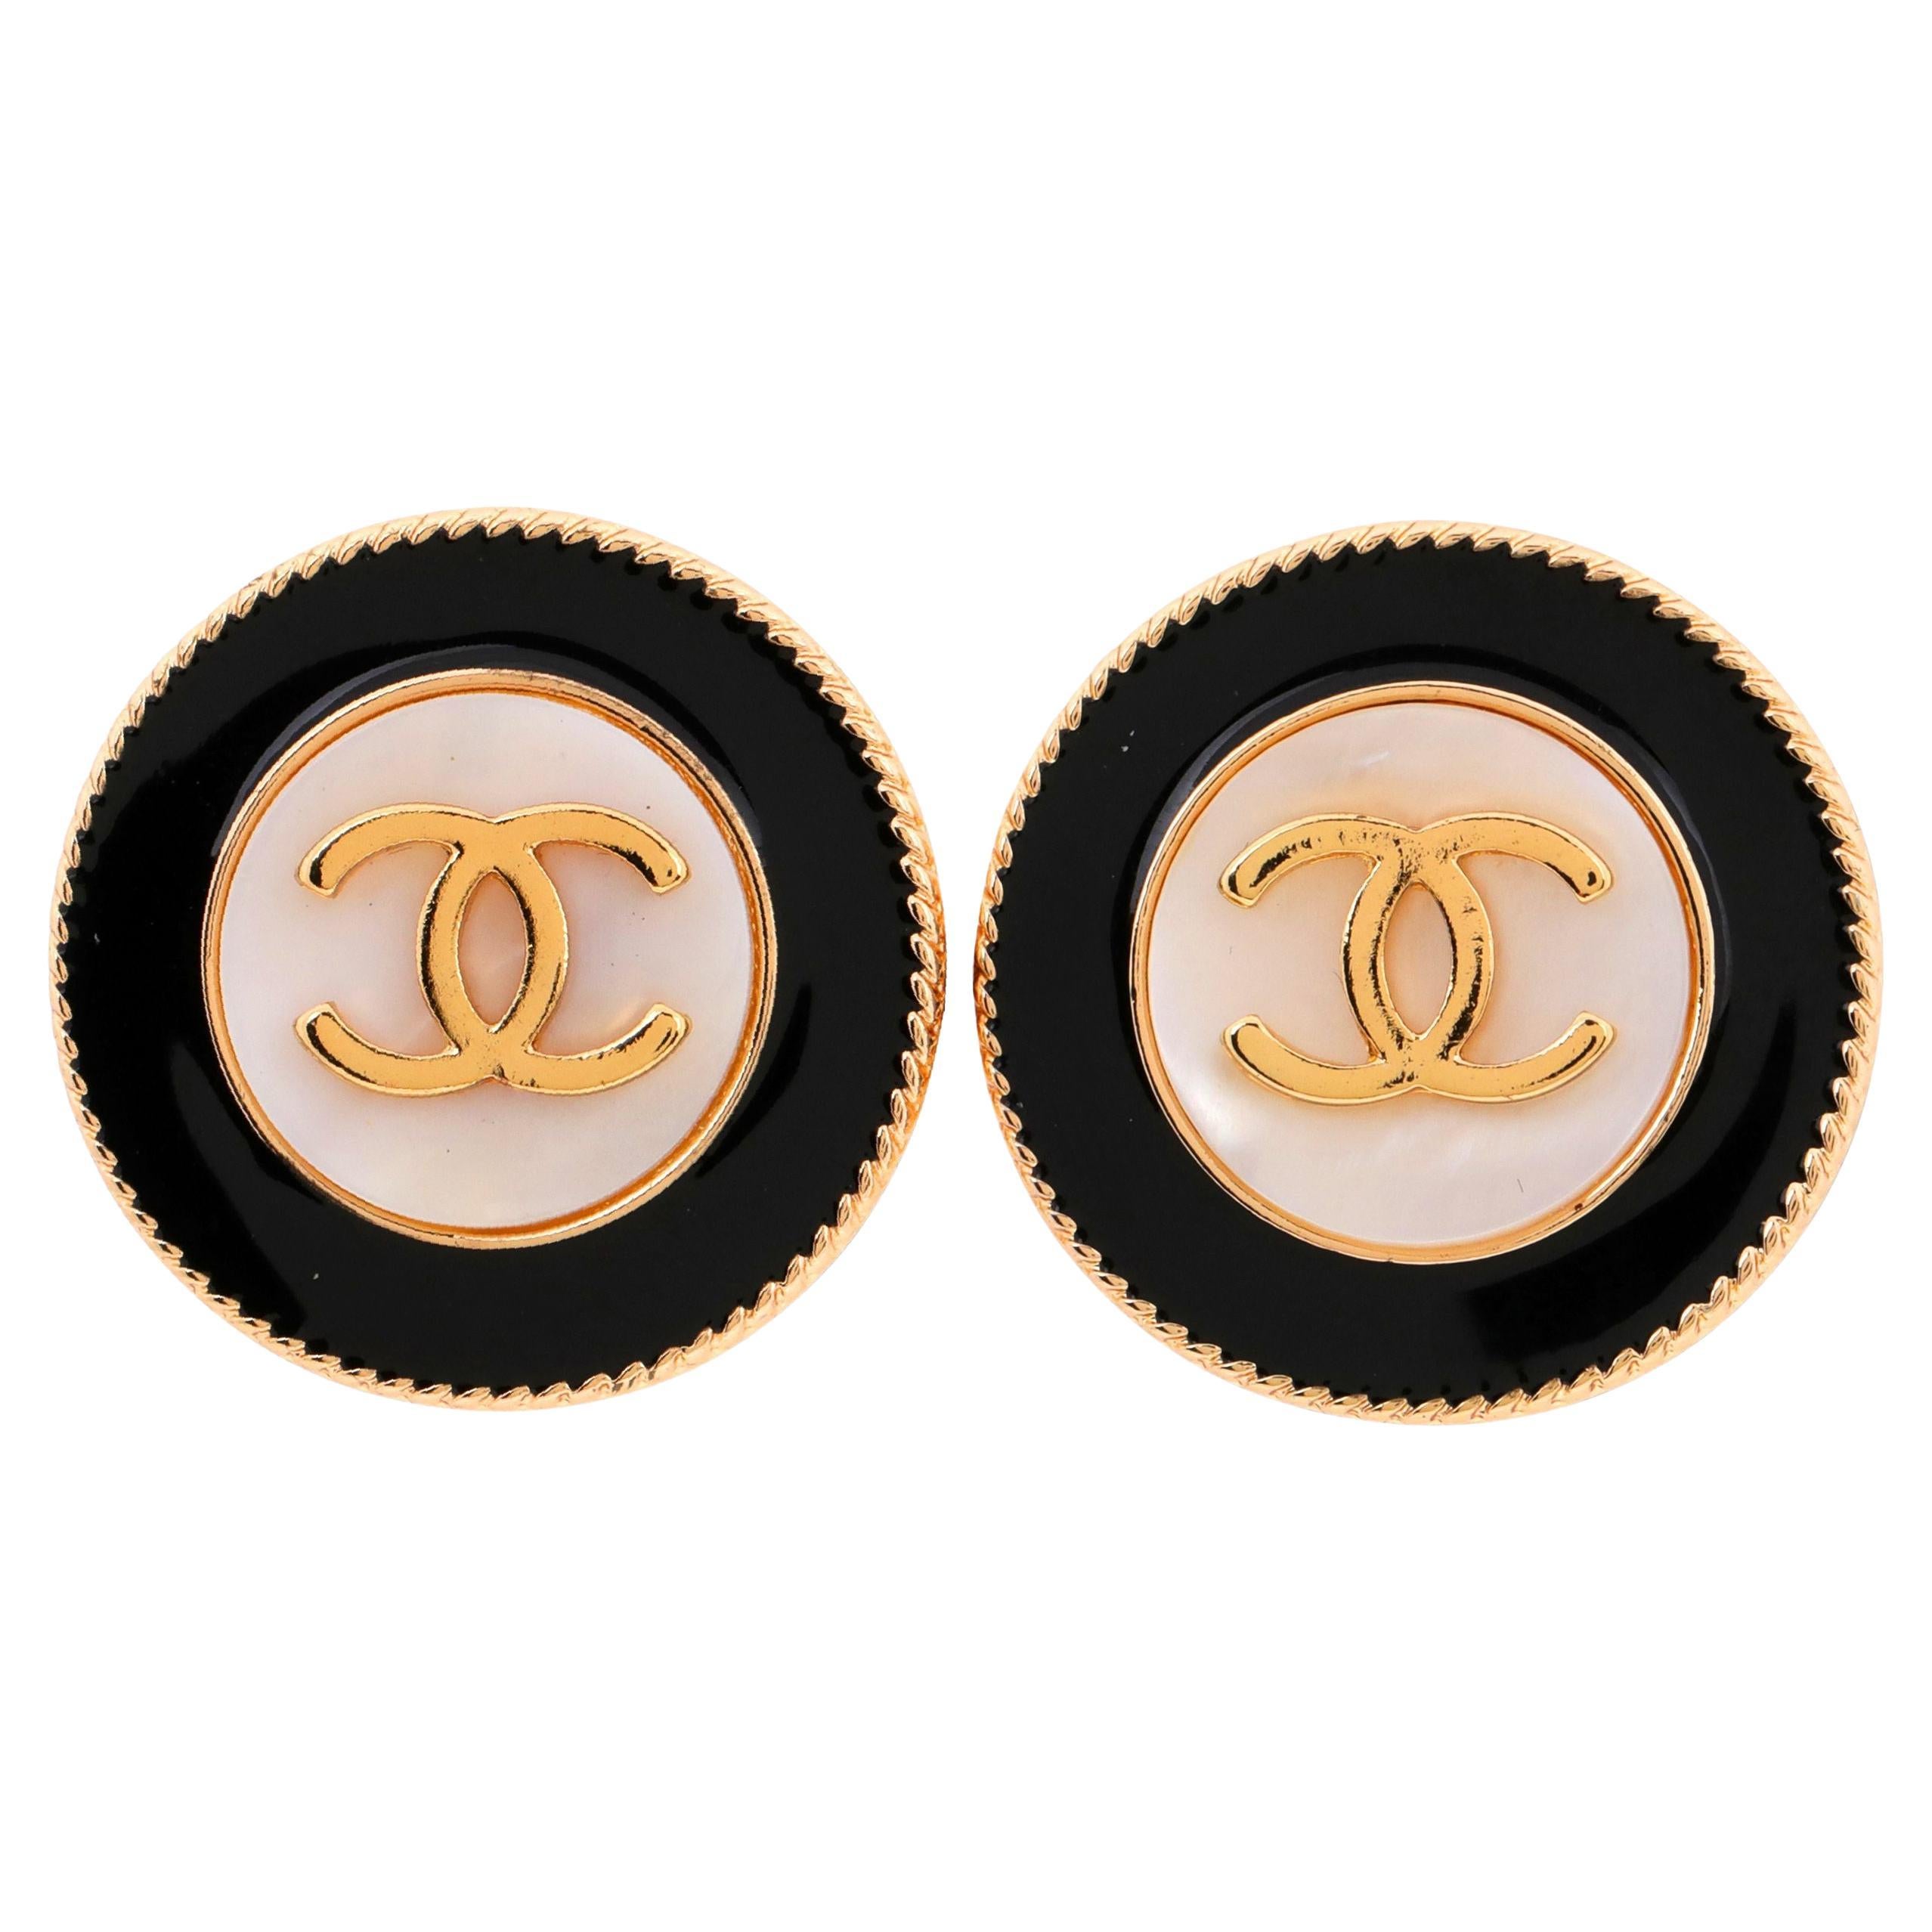 Chanel Black and White Pearlized CC Pierced Earrings For Sale